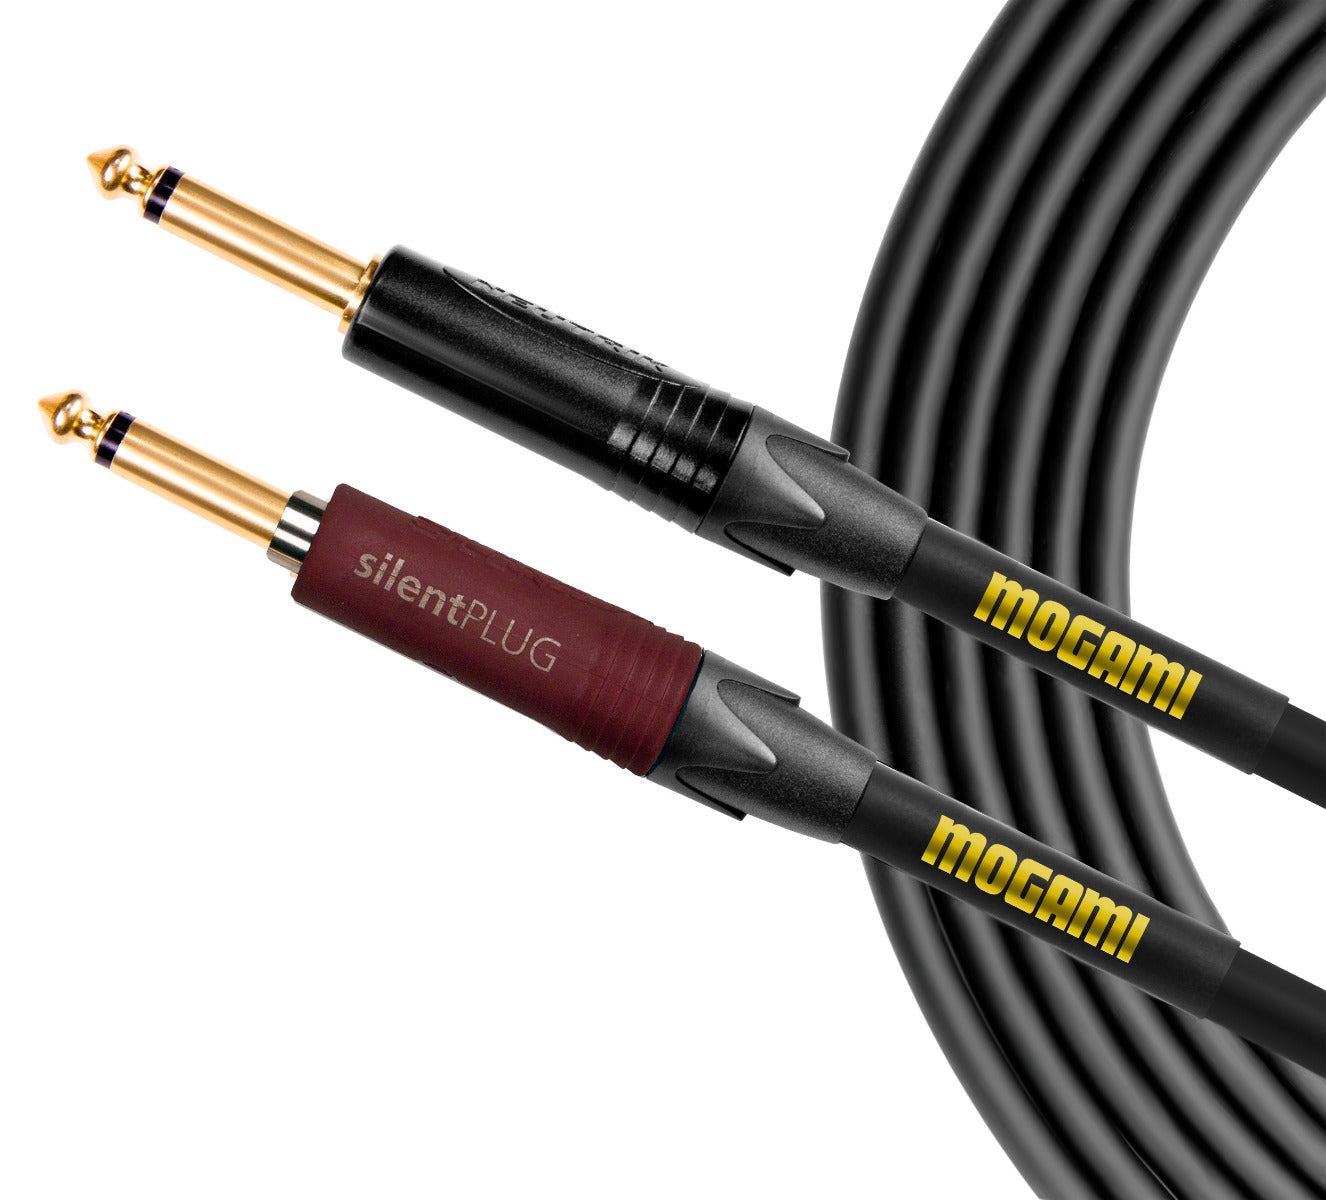 Mogami Gold Instrument Silent S Cable - 10'